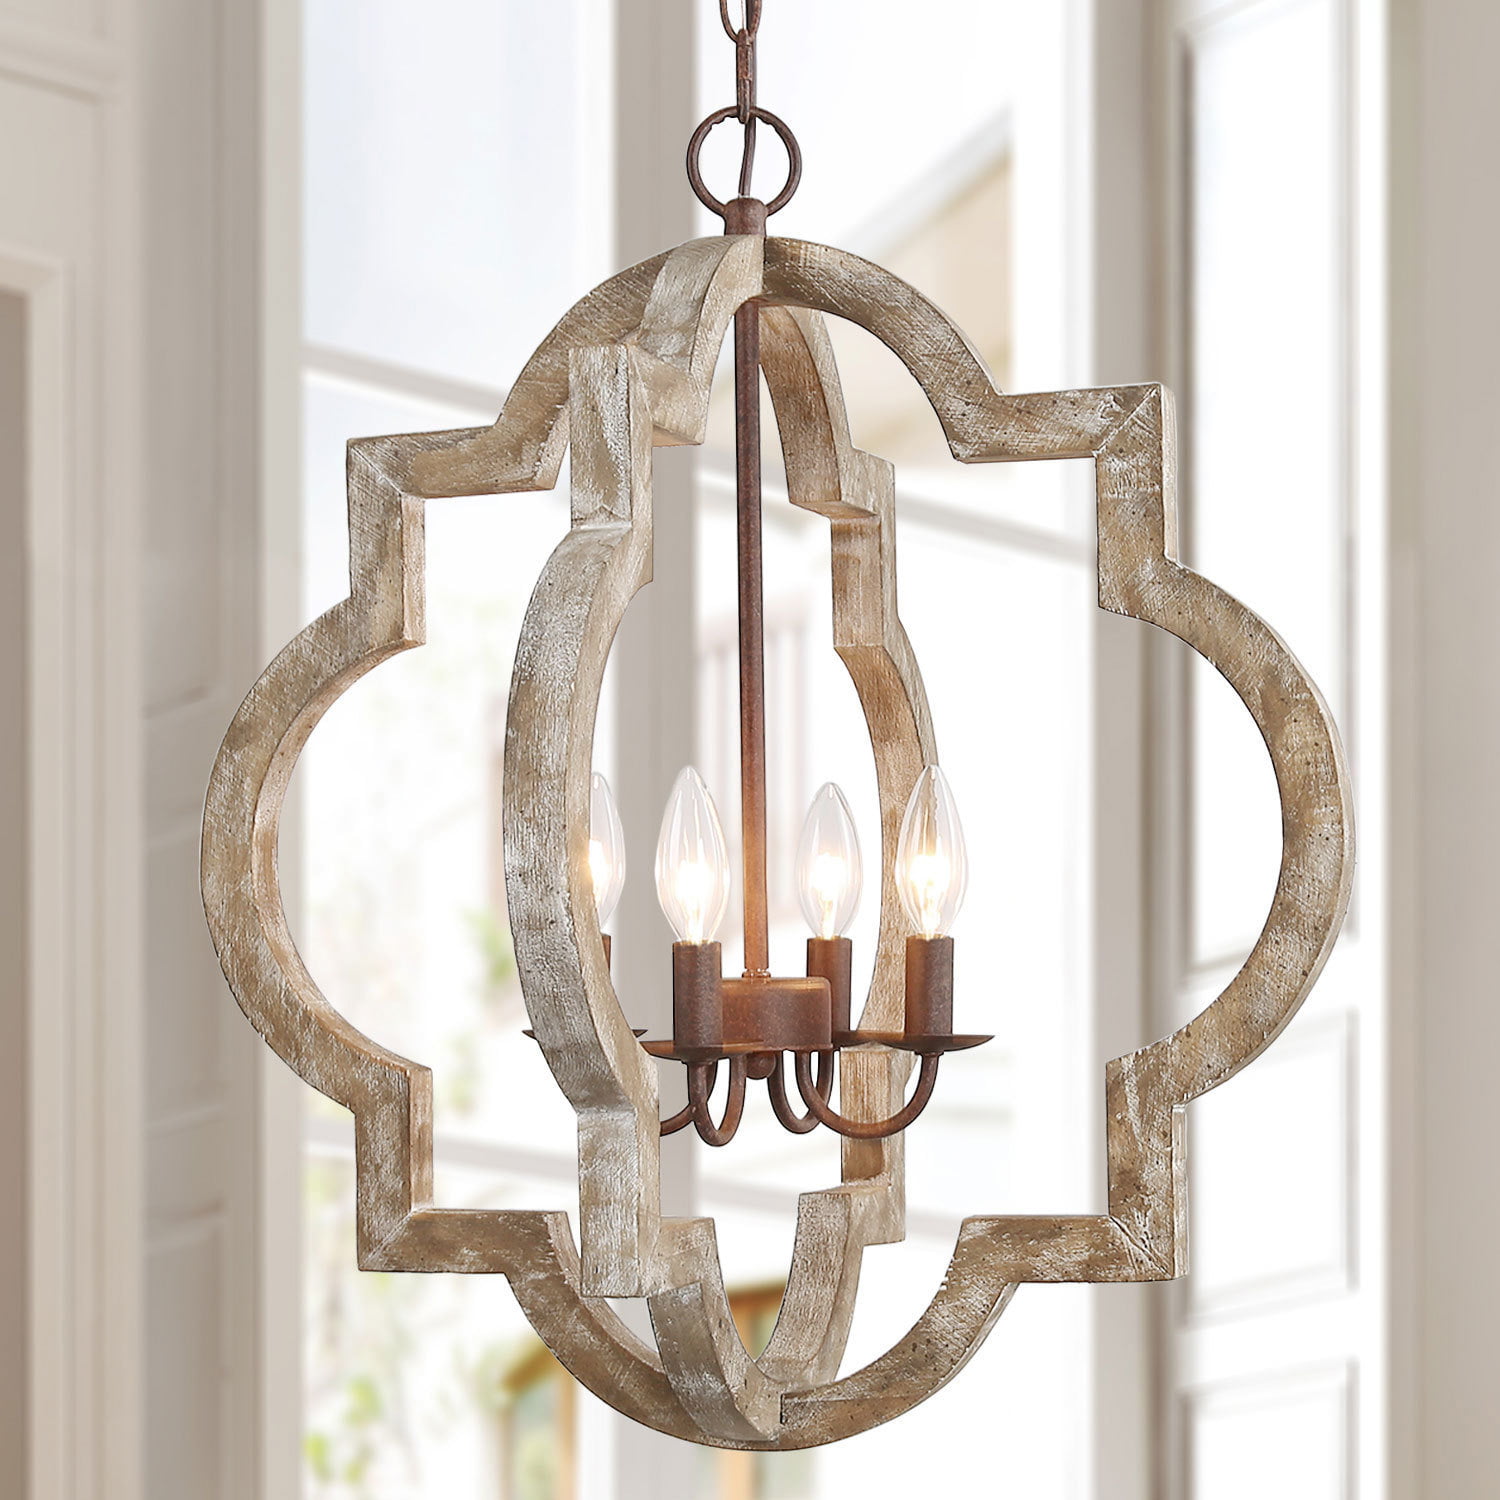 Lnc Rustic Chandeliers Shabby Chic, Rustic Light Fixtures For Living Room